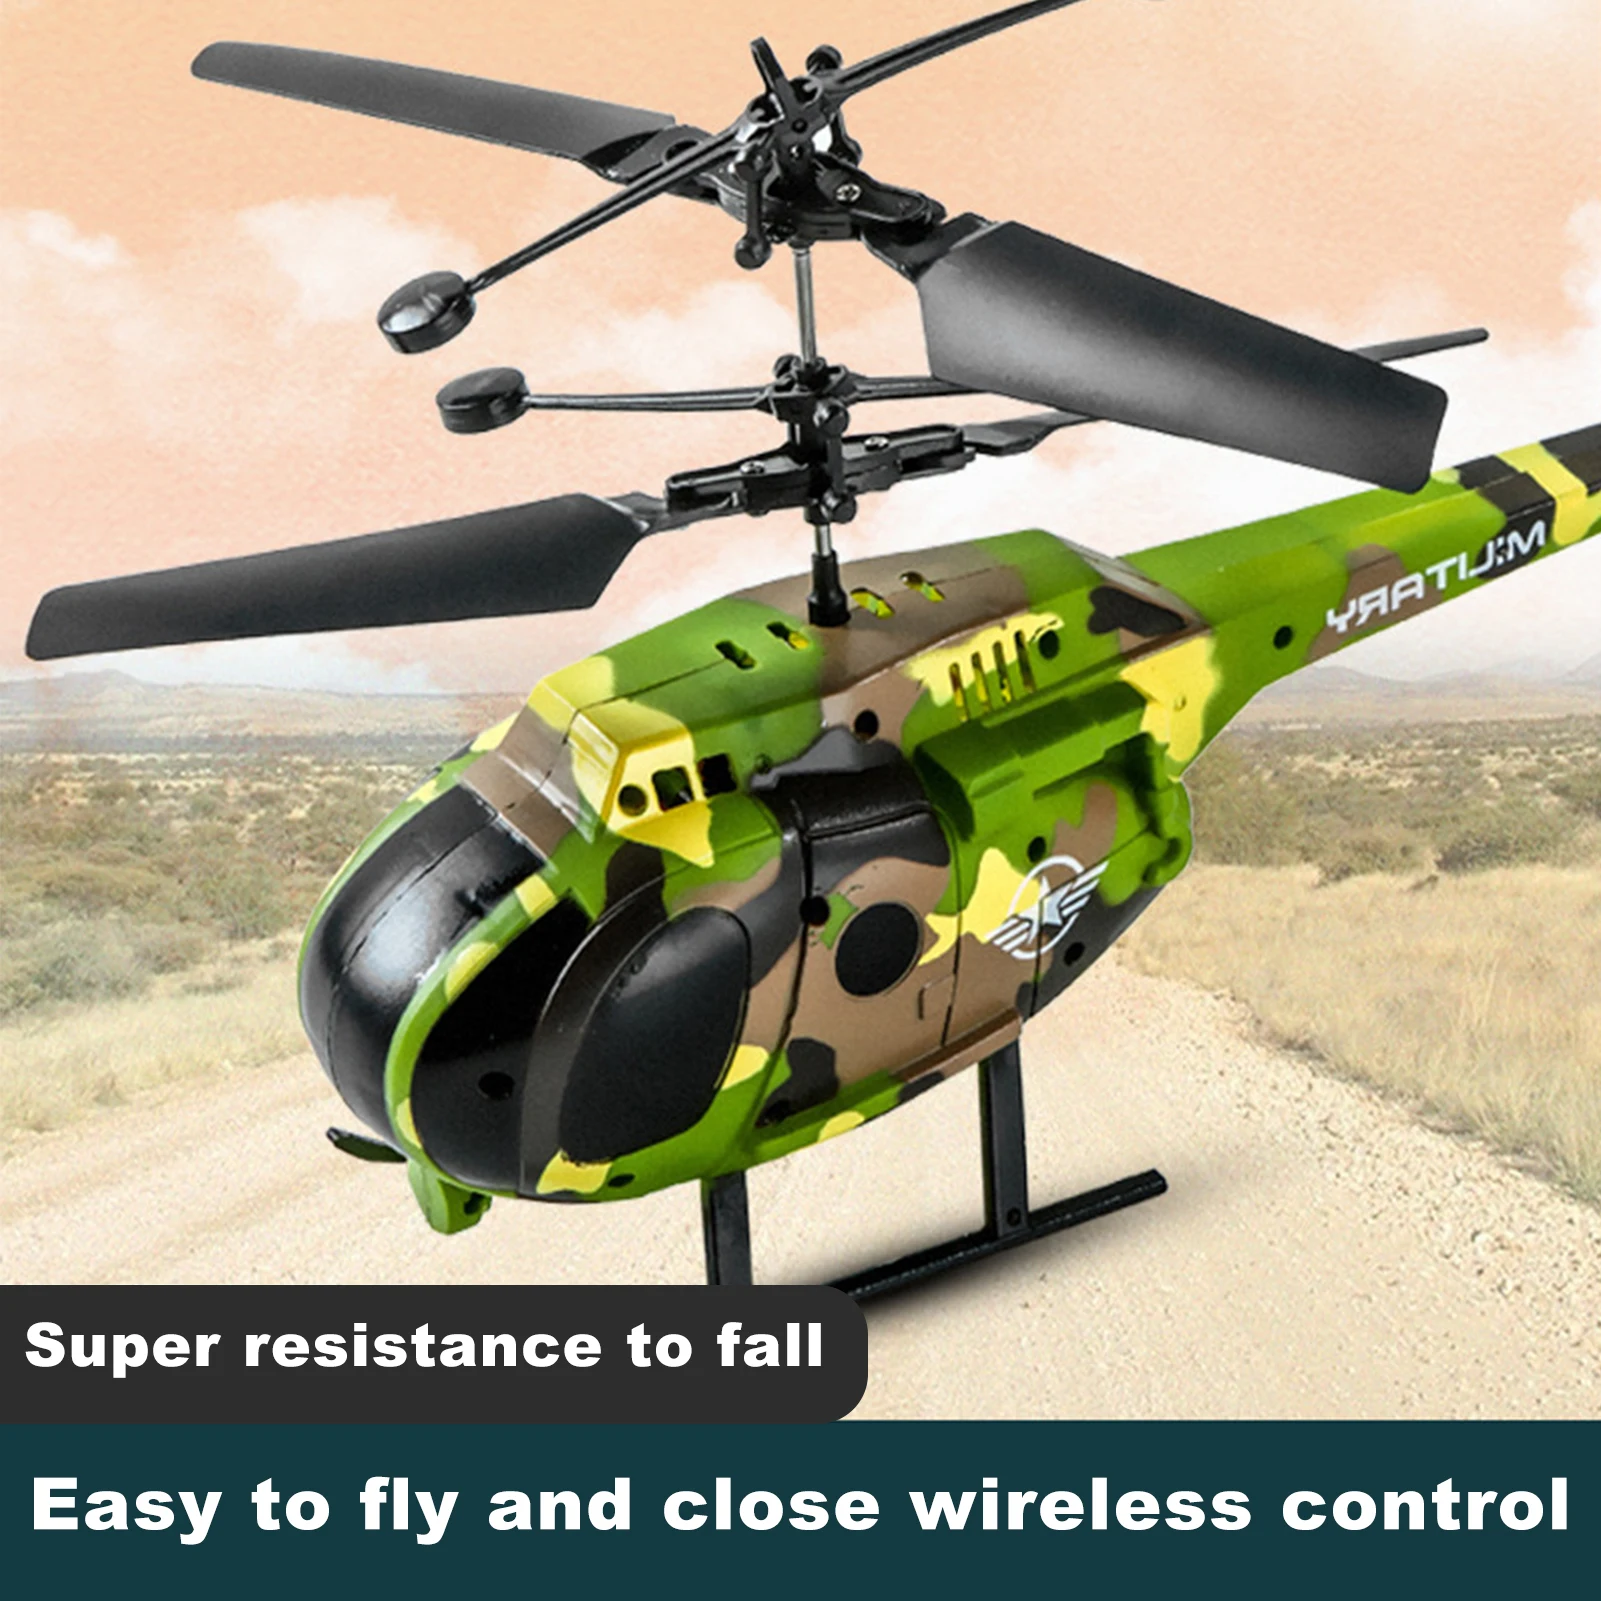 

2.4G RC Helicopter 2CH Mini Drone RC Drone Remote Control Plane Aircraft Kids Outdoor Indoor Flight Toys for Boys Children Gifts